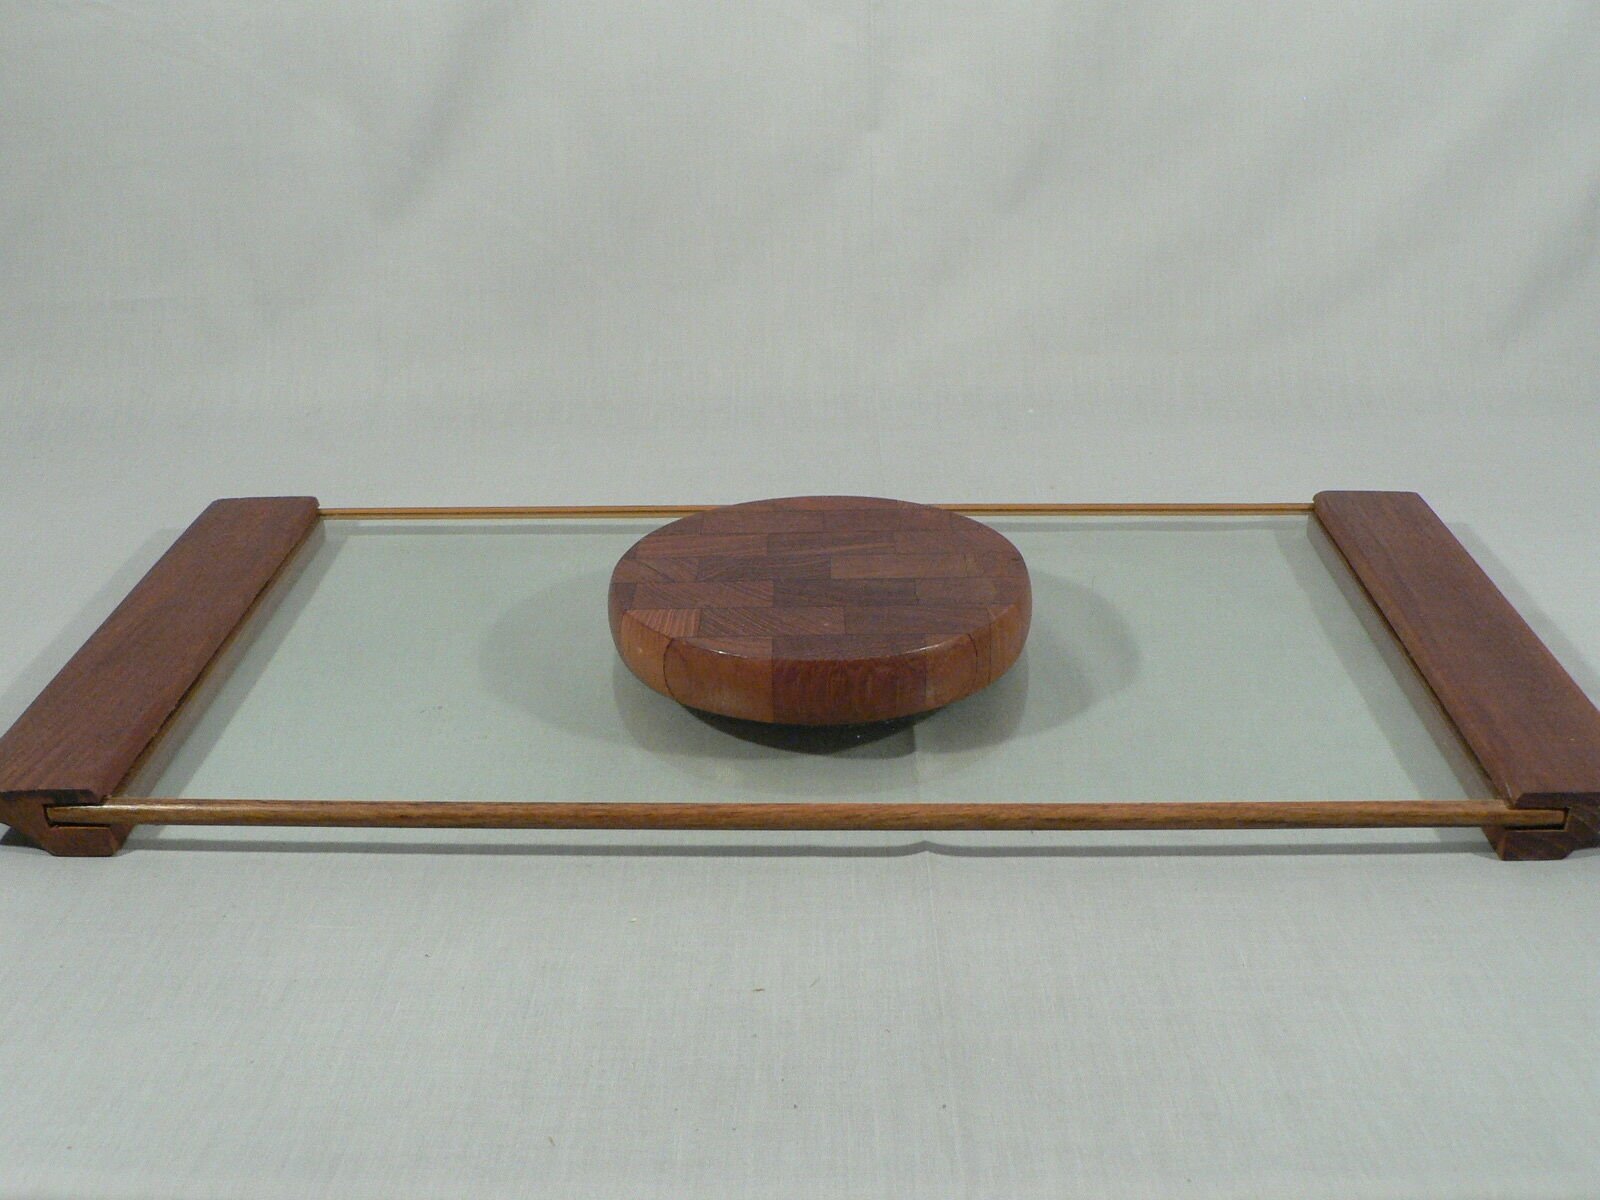 Vintage Retro glass serving tray with Cheese cutting board center mid-century